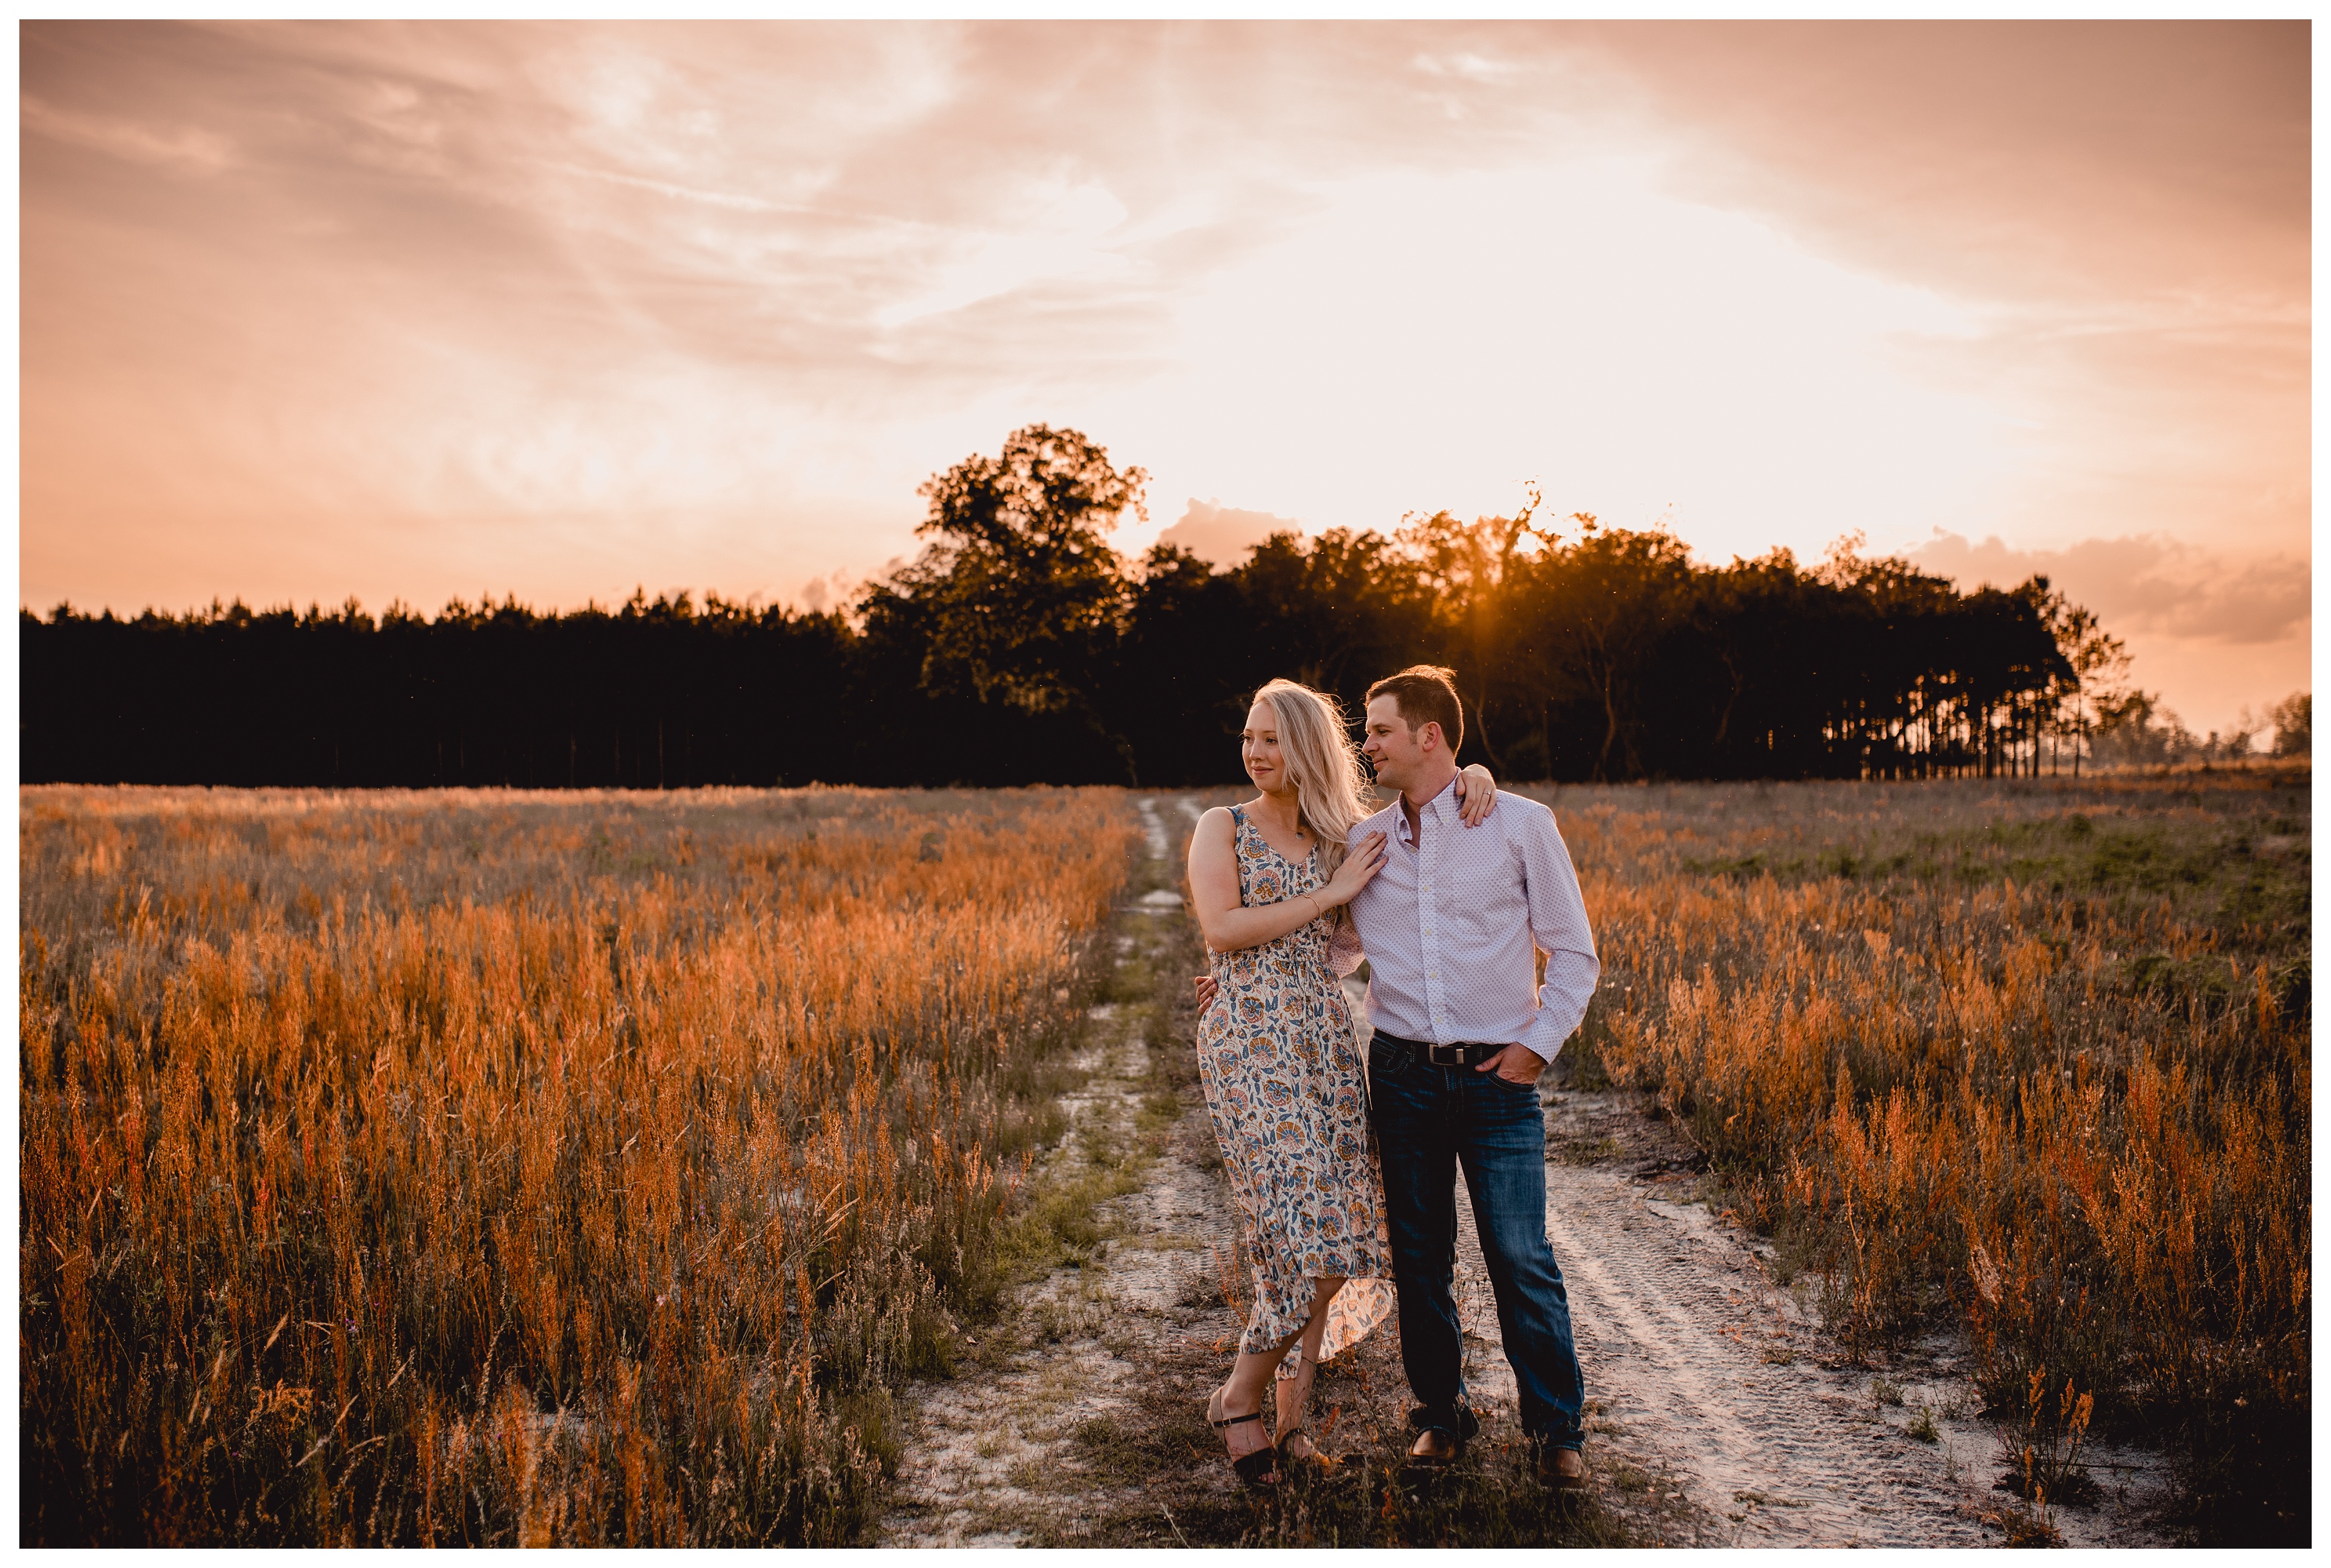 Farm engagement photos taken in Florida by professional wedding photographer. Shelly Williams Photography